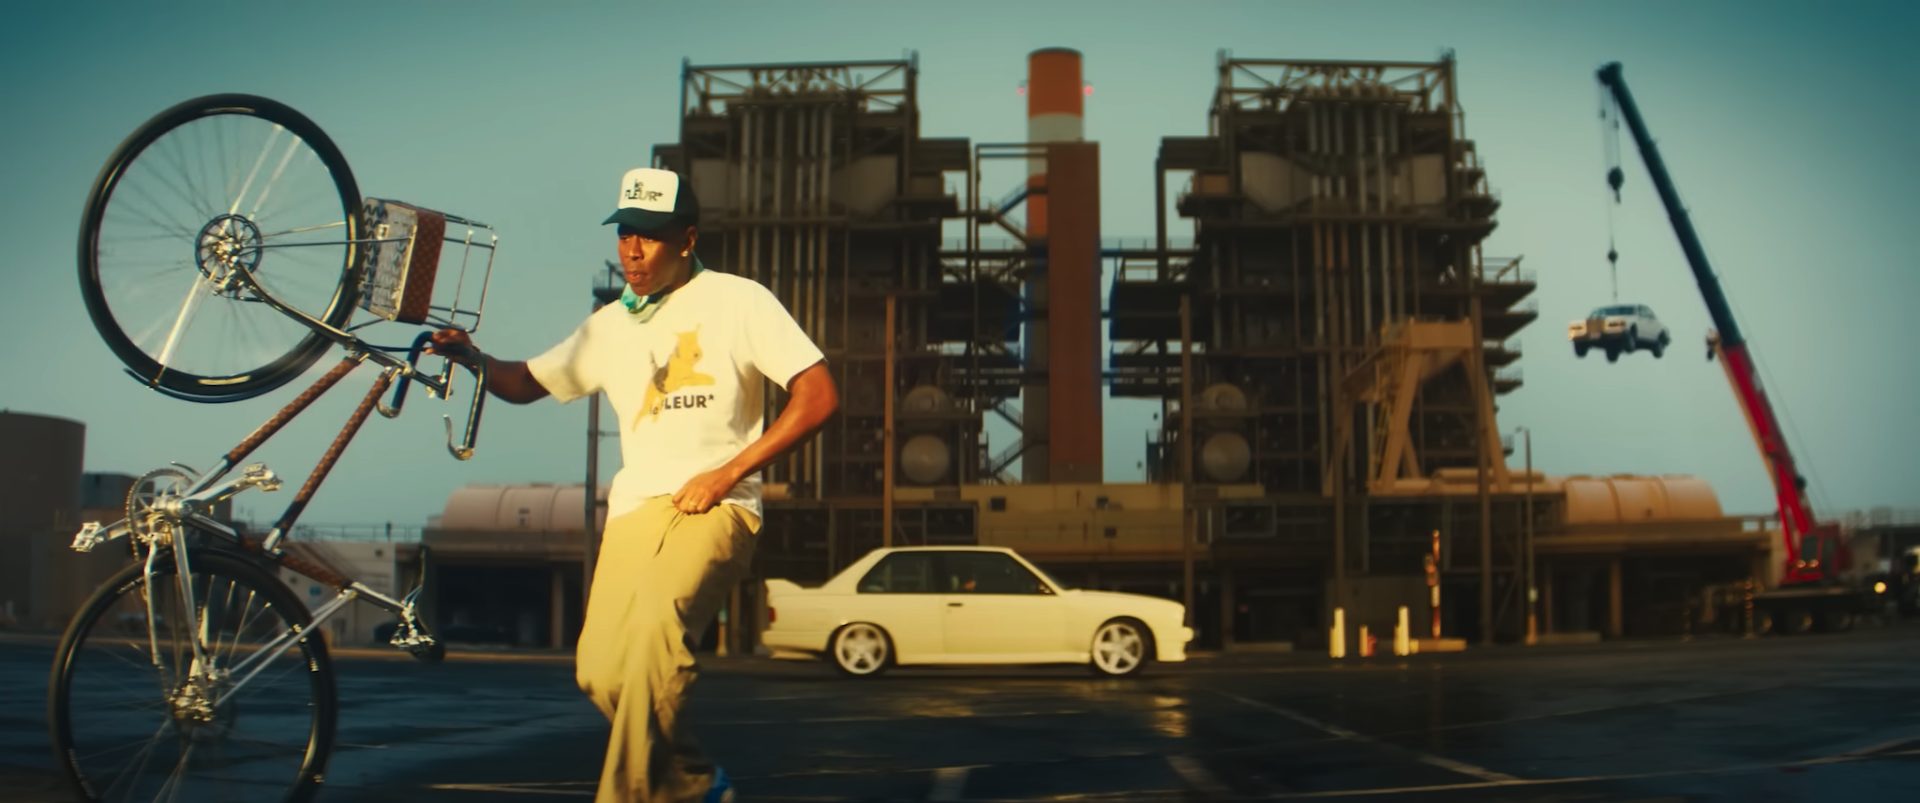 #
					Tyler, The Creator kündigt neues Album „Call me if you get lost: The Estate Sale“ an